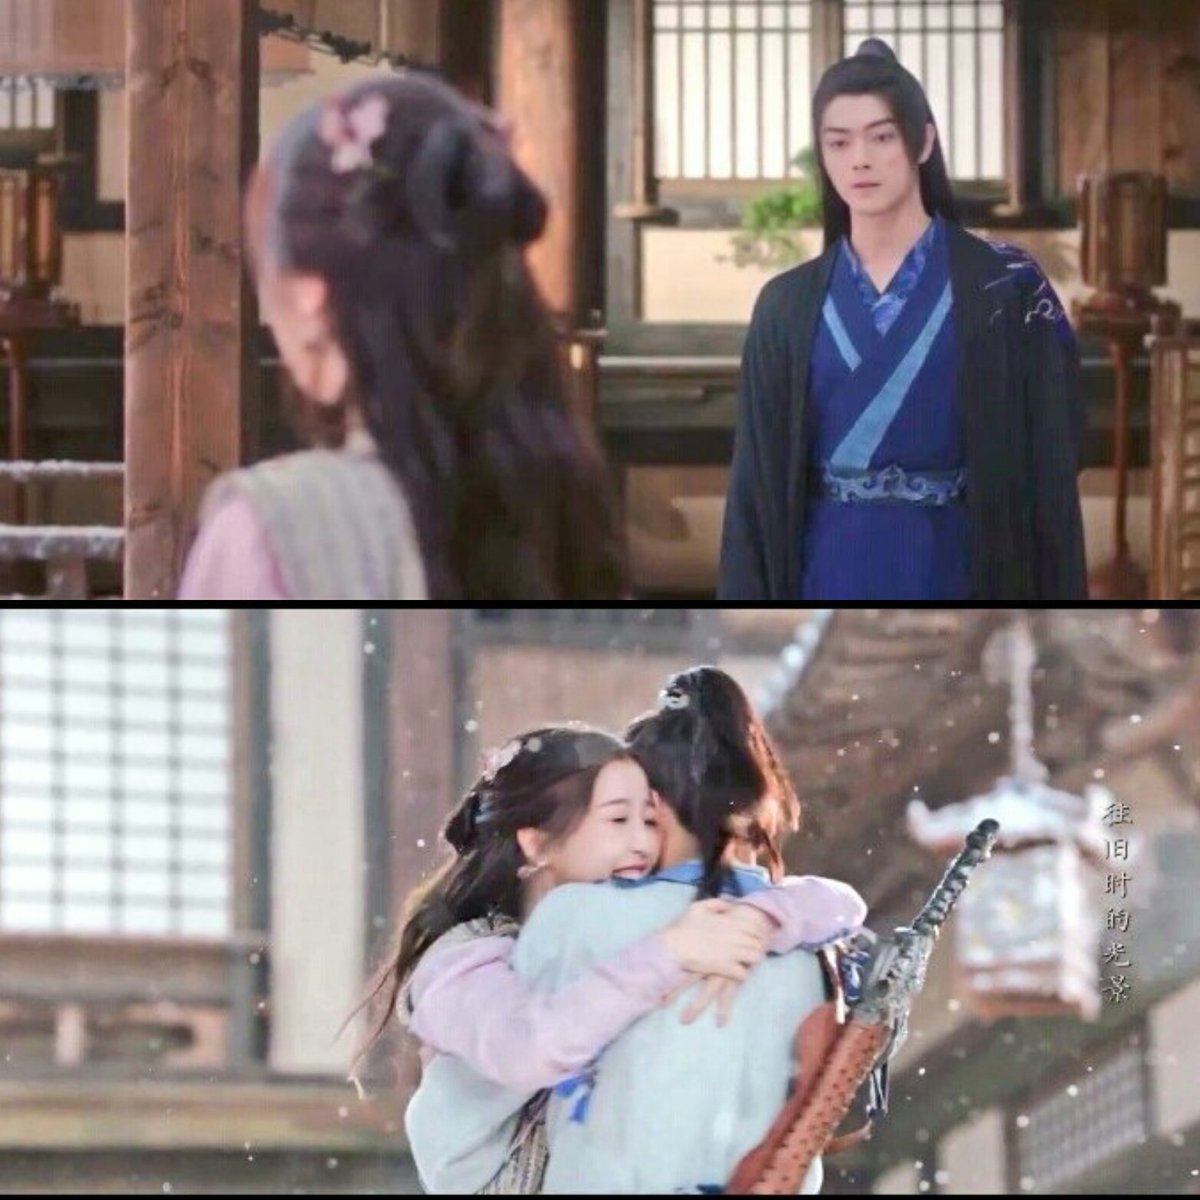 The pain Bian Luohan felt upon seeing Qi and Jinzhao very happy together after a long time of not seeing each other. 😢

#SwordAndFairy 6 
#EstherYu #XuKai #YuShuxin 
#SwordAndFairy6 #cdrama